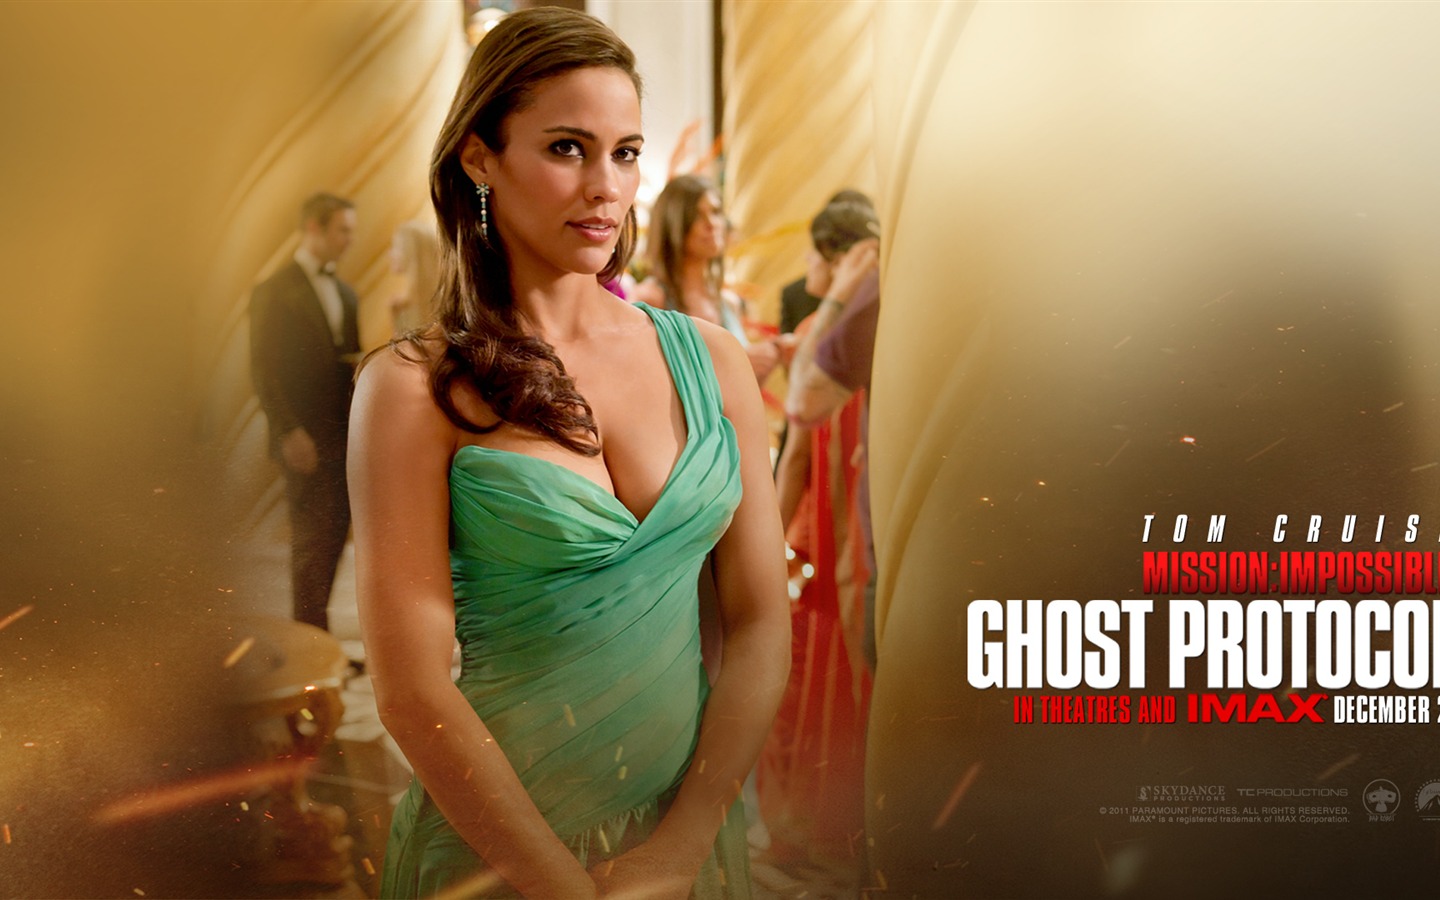 Mission: Impossible - Ghost Protocol HD Wallpapers #7 - 1440x900